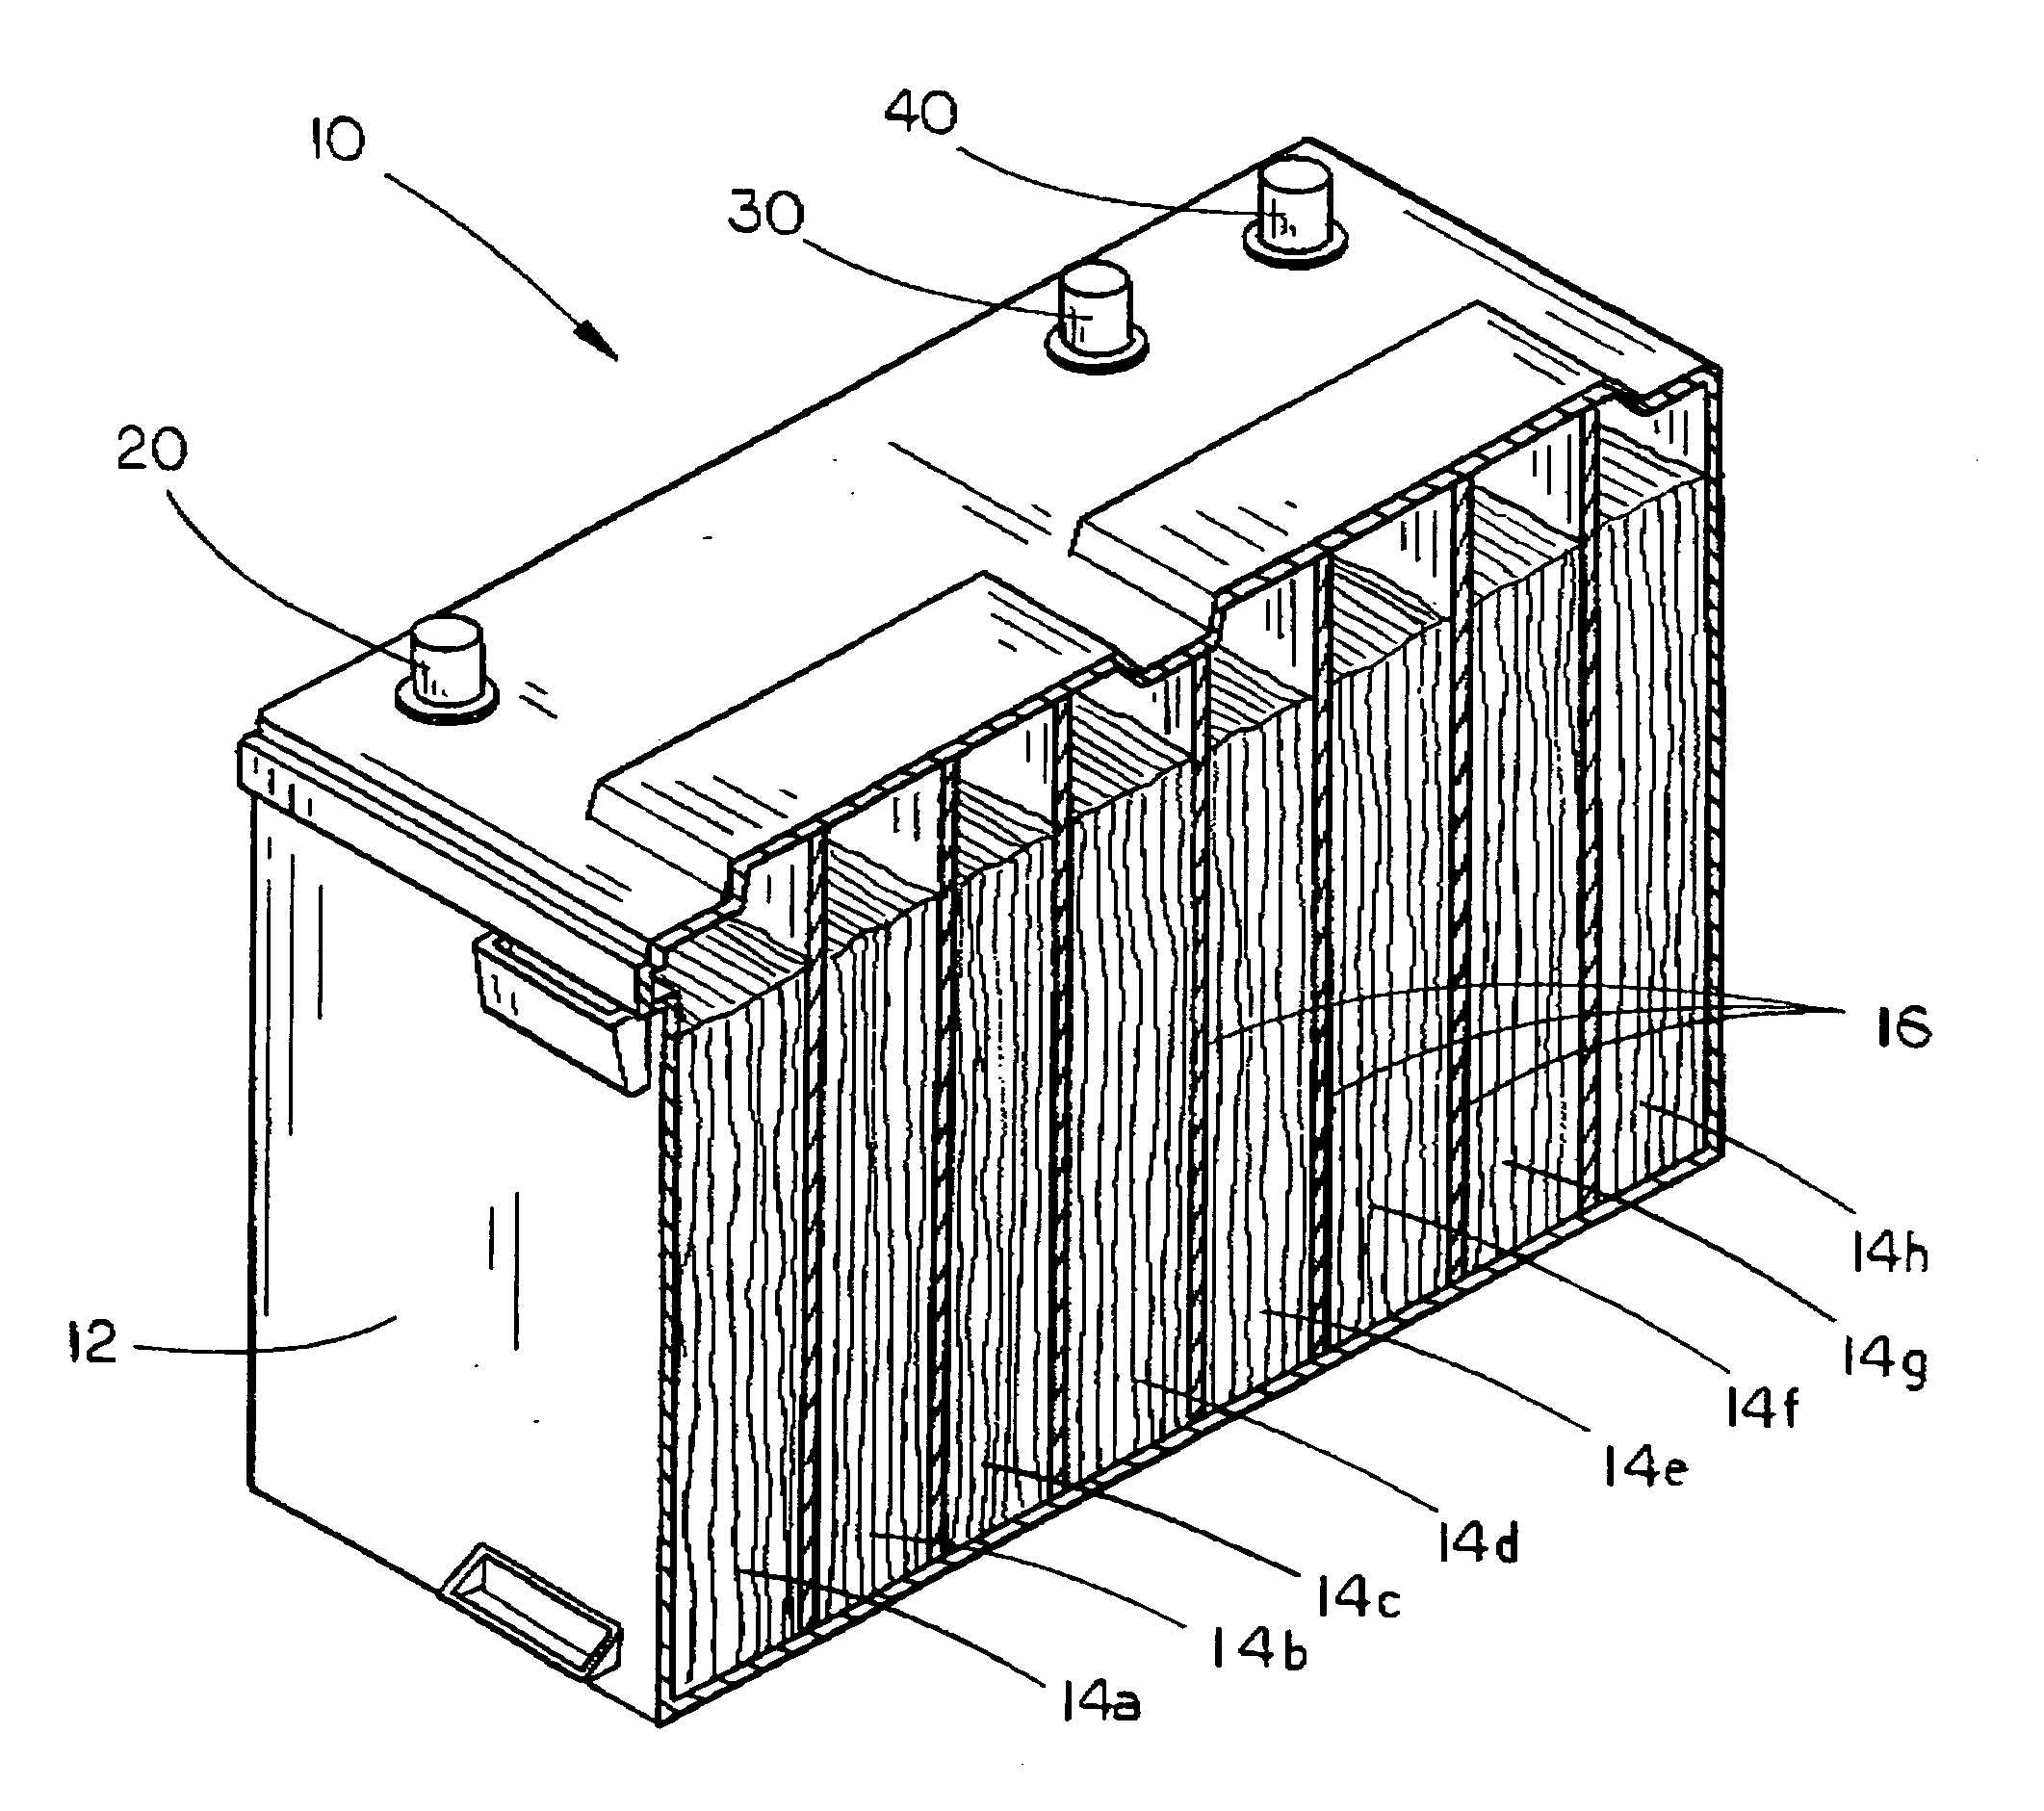 Dual voltage battery with separate terminals